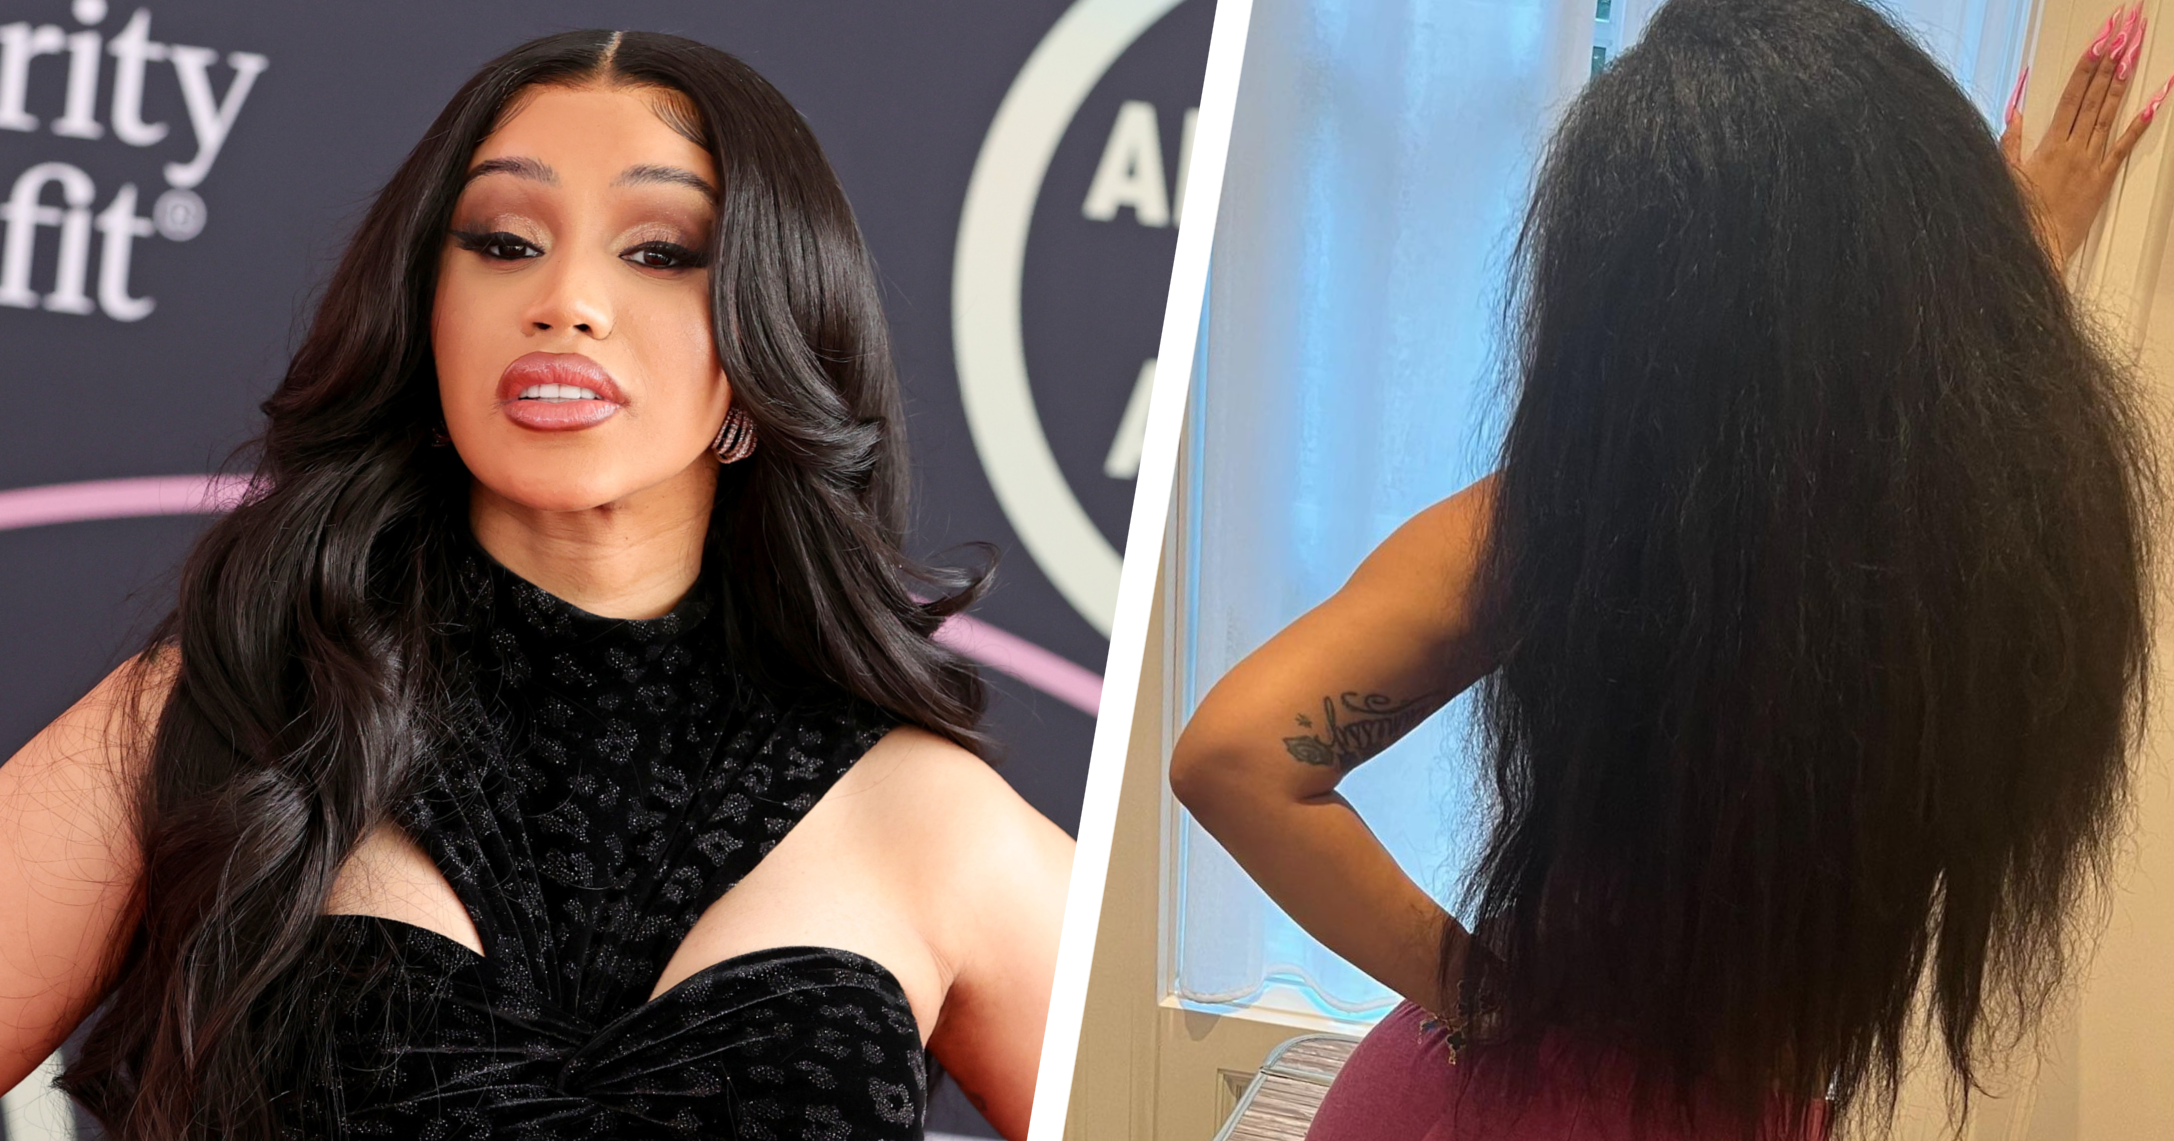 Boiling Onion' Beauty Tip Cardi B Uses To Make Her Hair 'Shine' Met With  Mixed Reactions | CafeMom.com